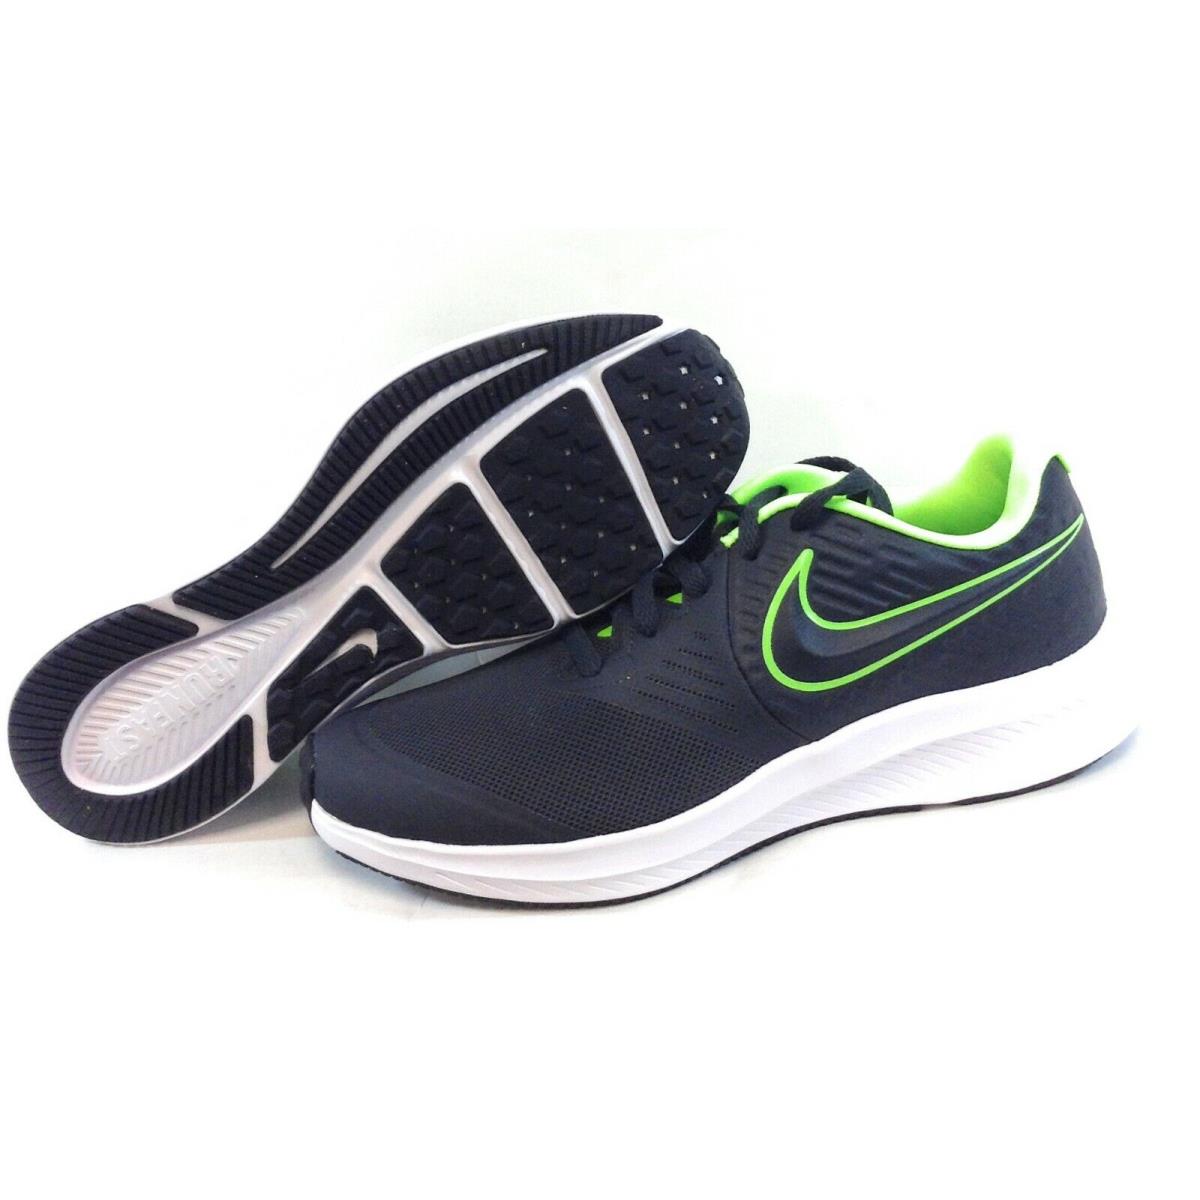 Boys Kids Youth Nike Star Runner AQ3542 004 Anthracite Grey Green Sneakers Shoes